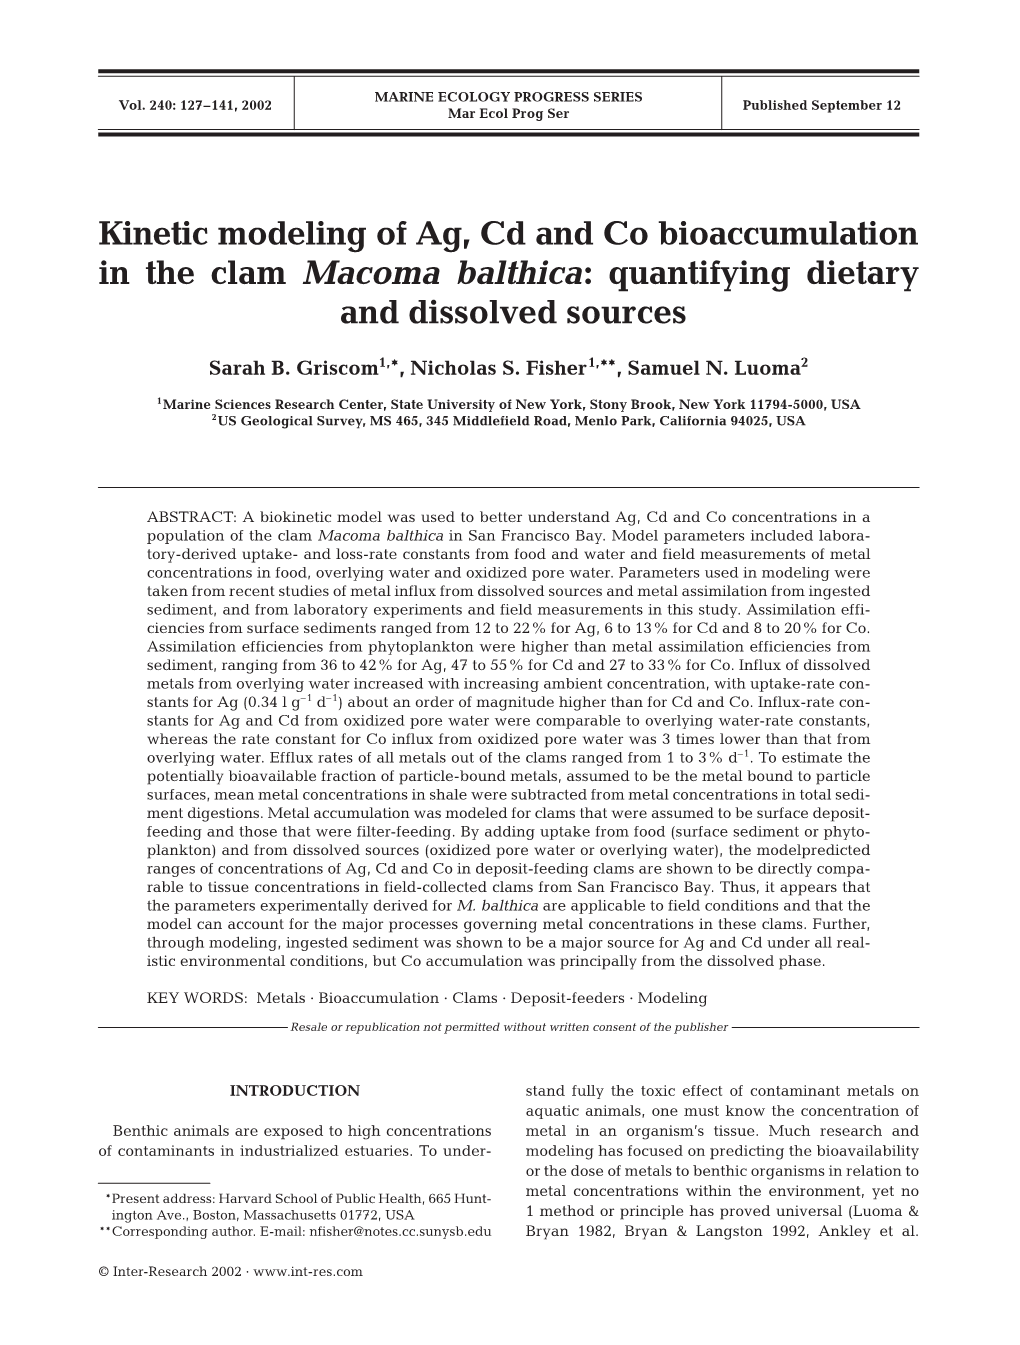 Kinetic Modeling of Ag, Cd and Co Bioaccumulation in the Clam Macoma Balthica: Quantifying Dietary and Dissolved Sources